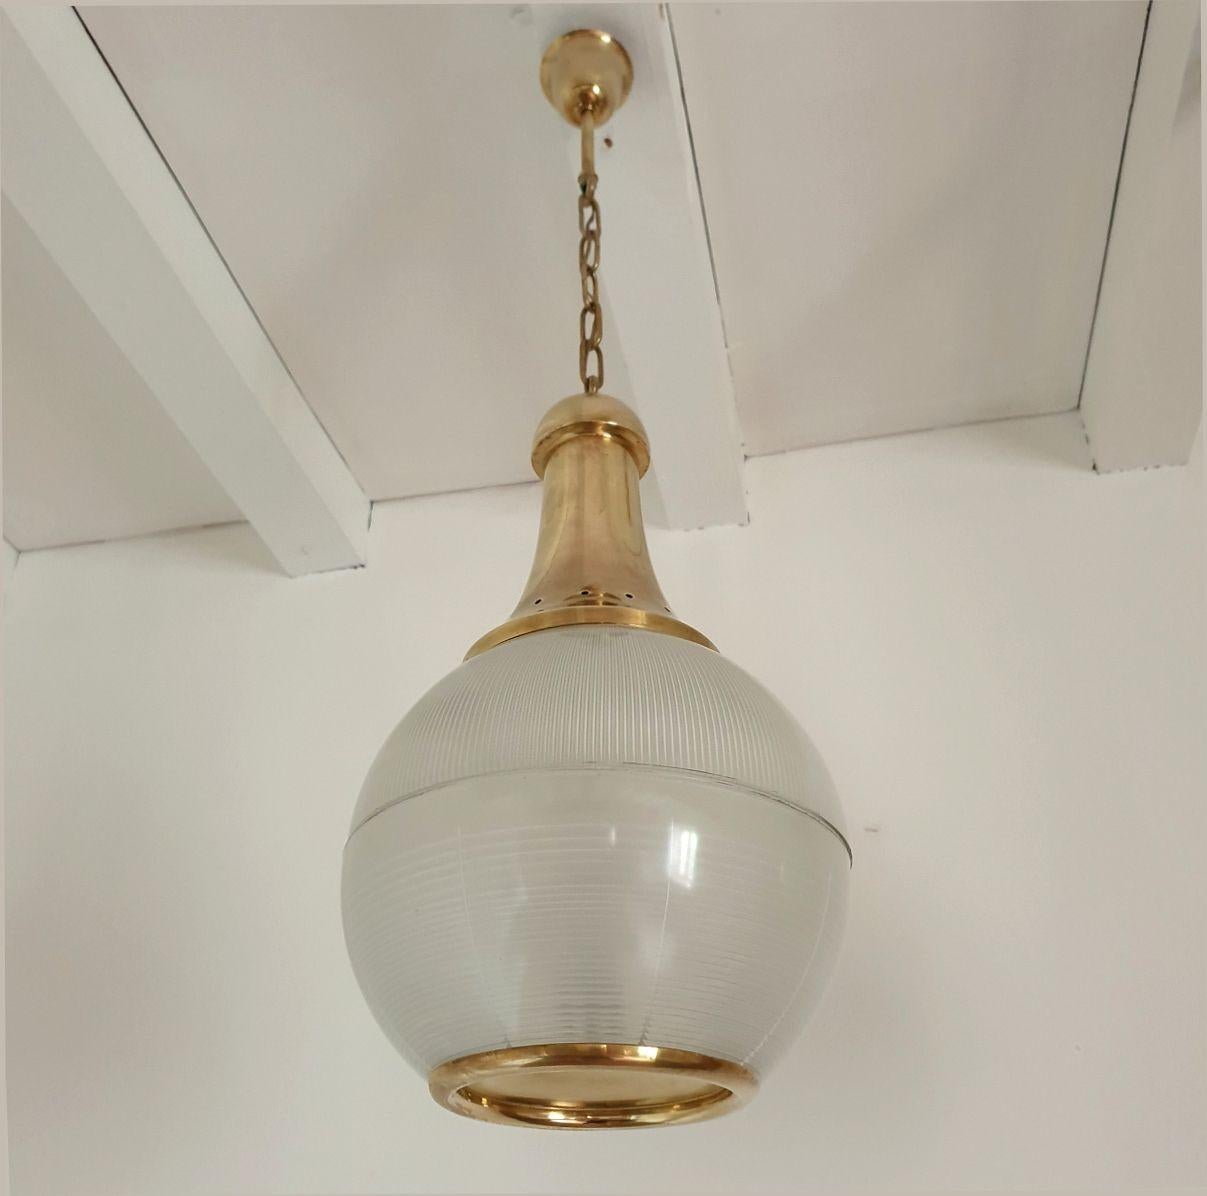 Pair of pendant lights by Dominioni In Excellent Condition For Sale In Dallas, TX